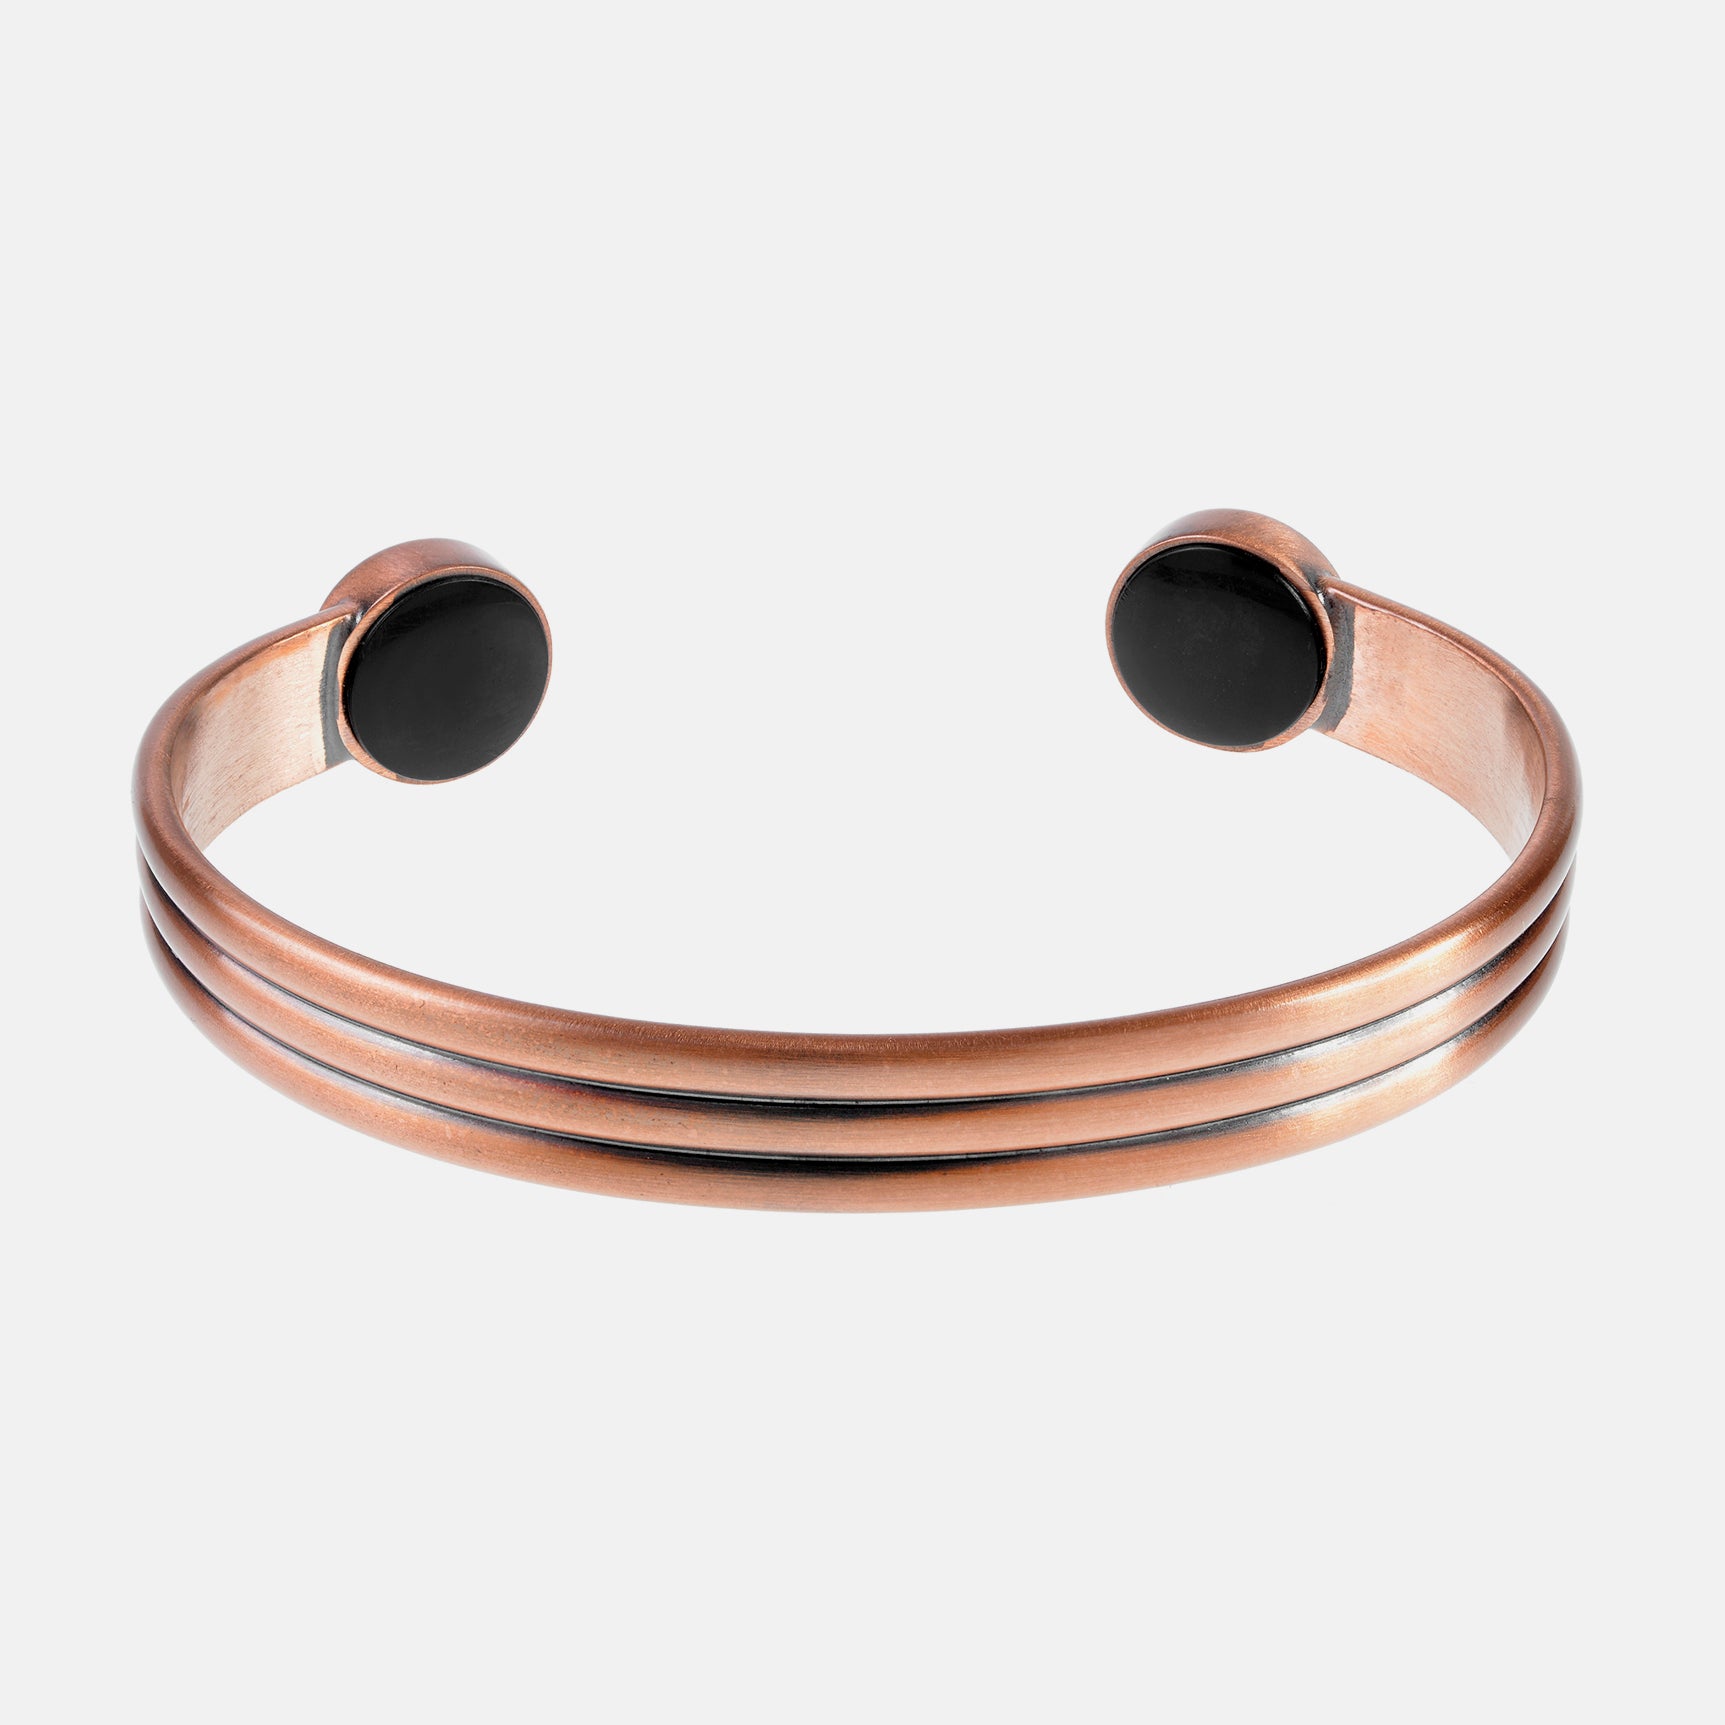 How to Prevent Skin Discoloration From Copper Jewelry - AnnaHarper